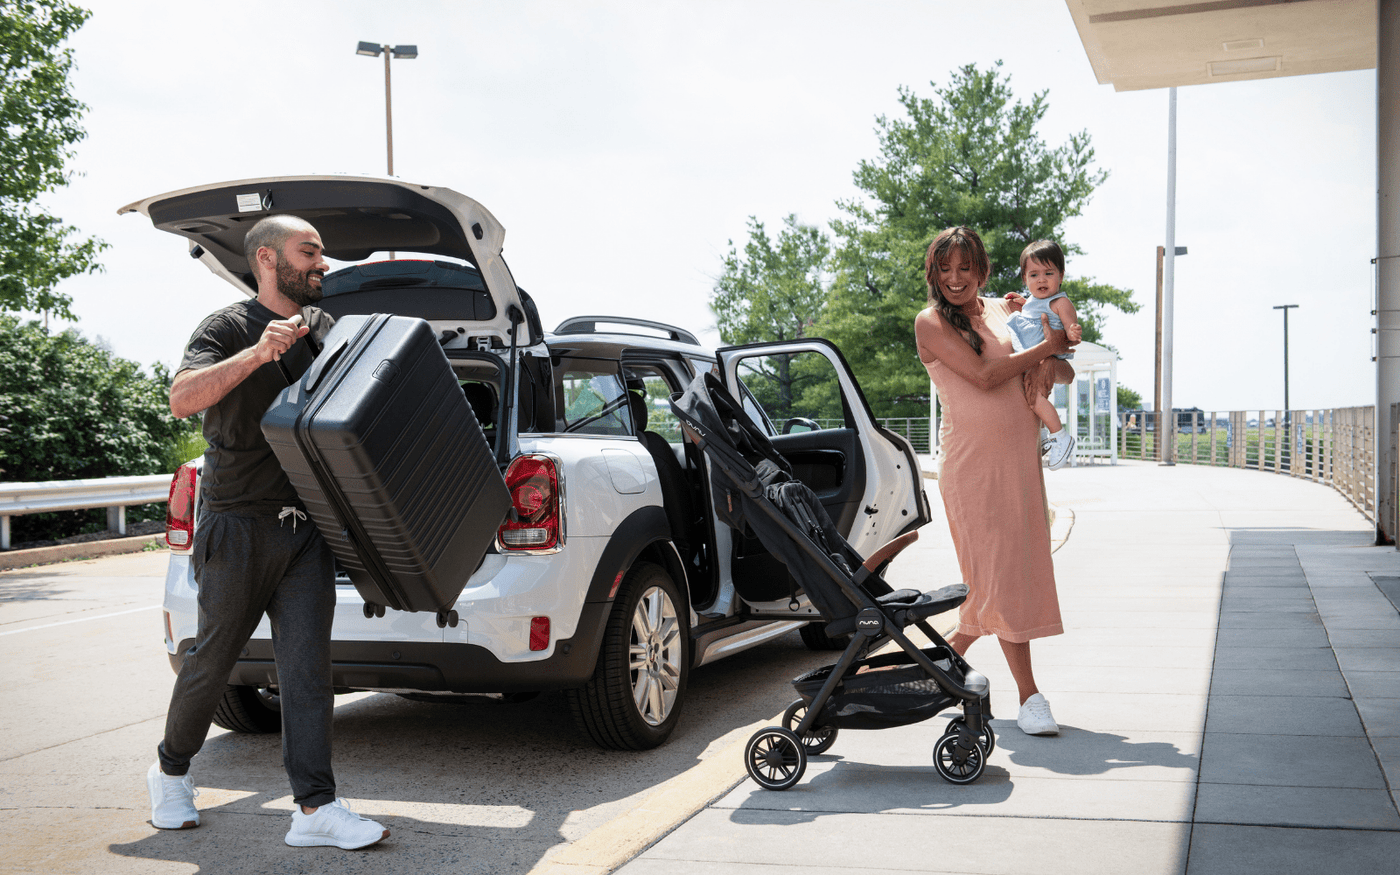 Nuna TRVL Series Strollers and Accessories